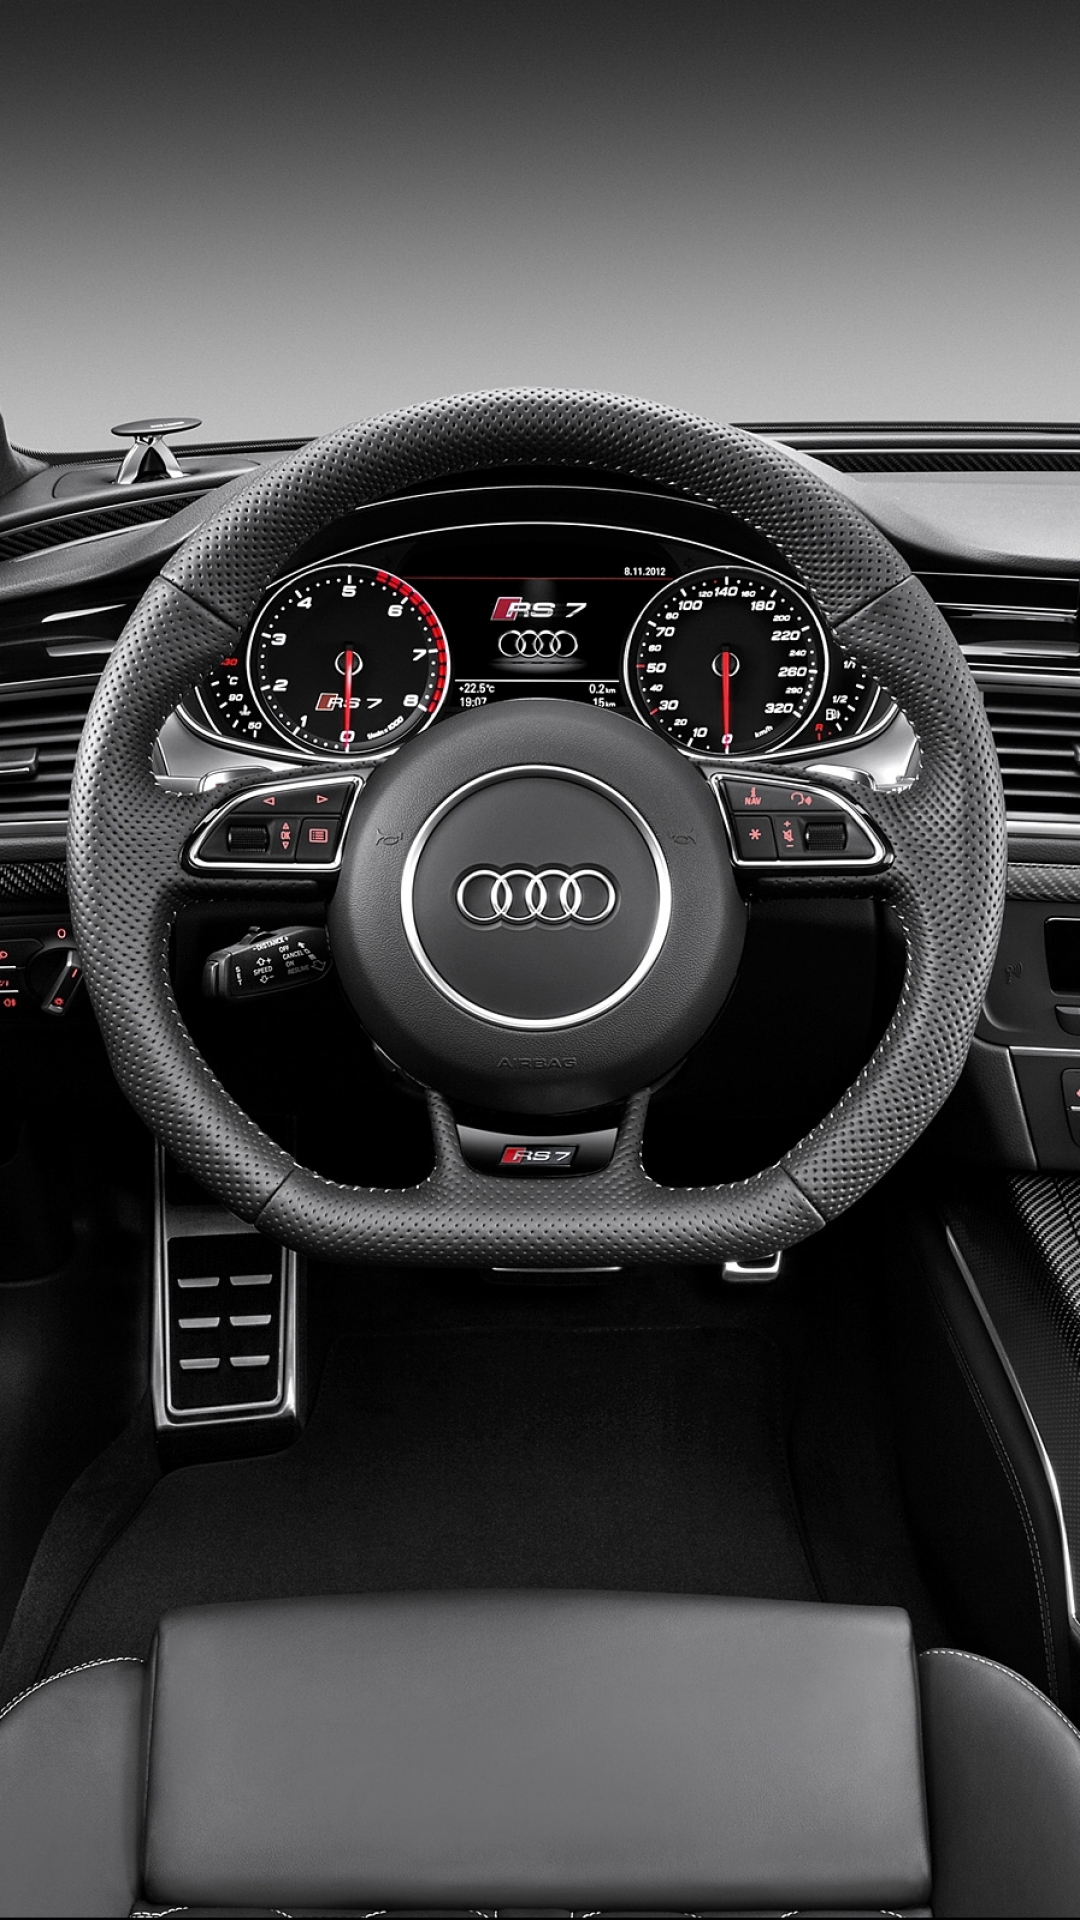 Download wallpaper 2560x1600 car offroad audi rs7 dual wide 1610  2560x1600 hd background 22527